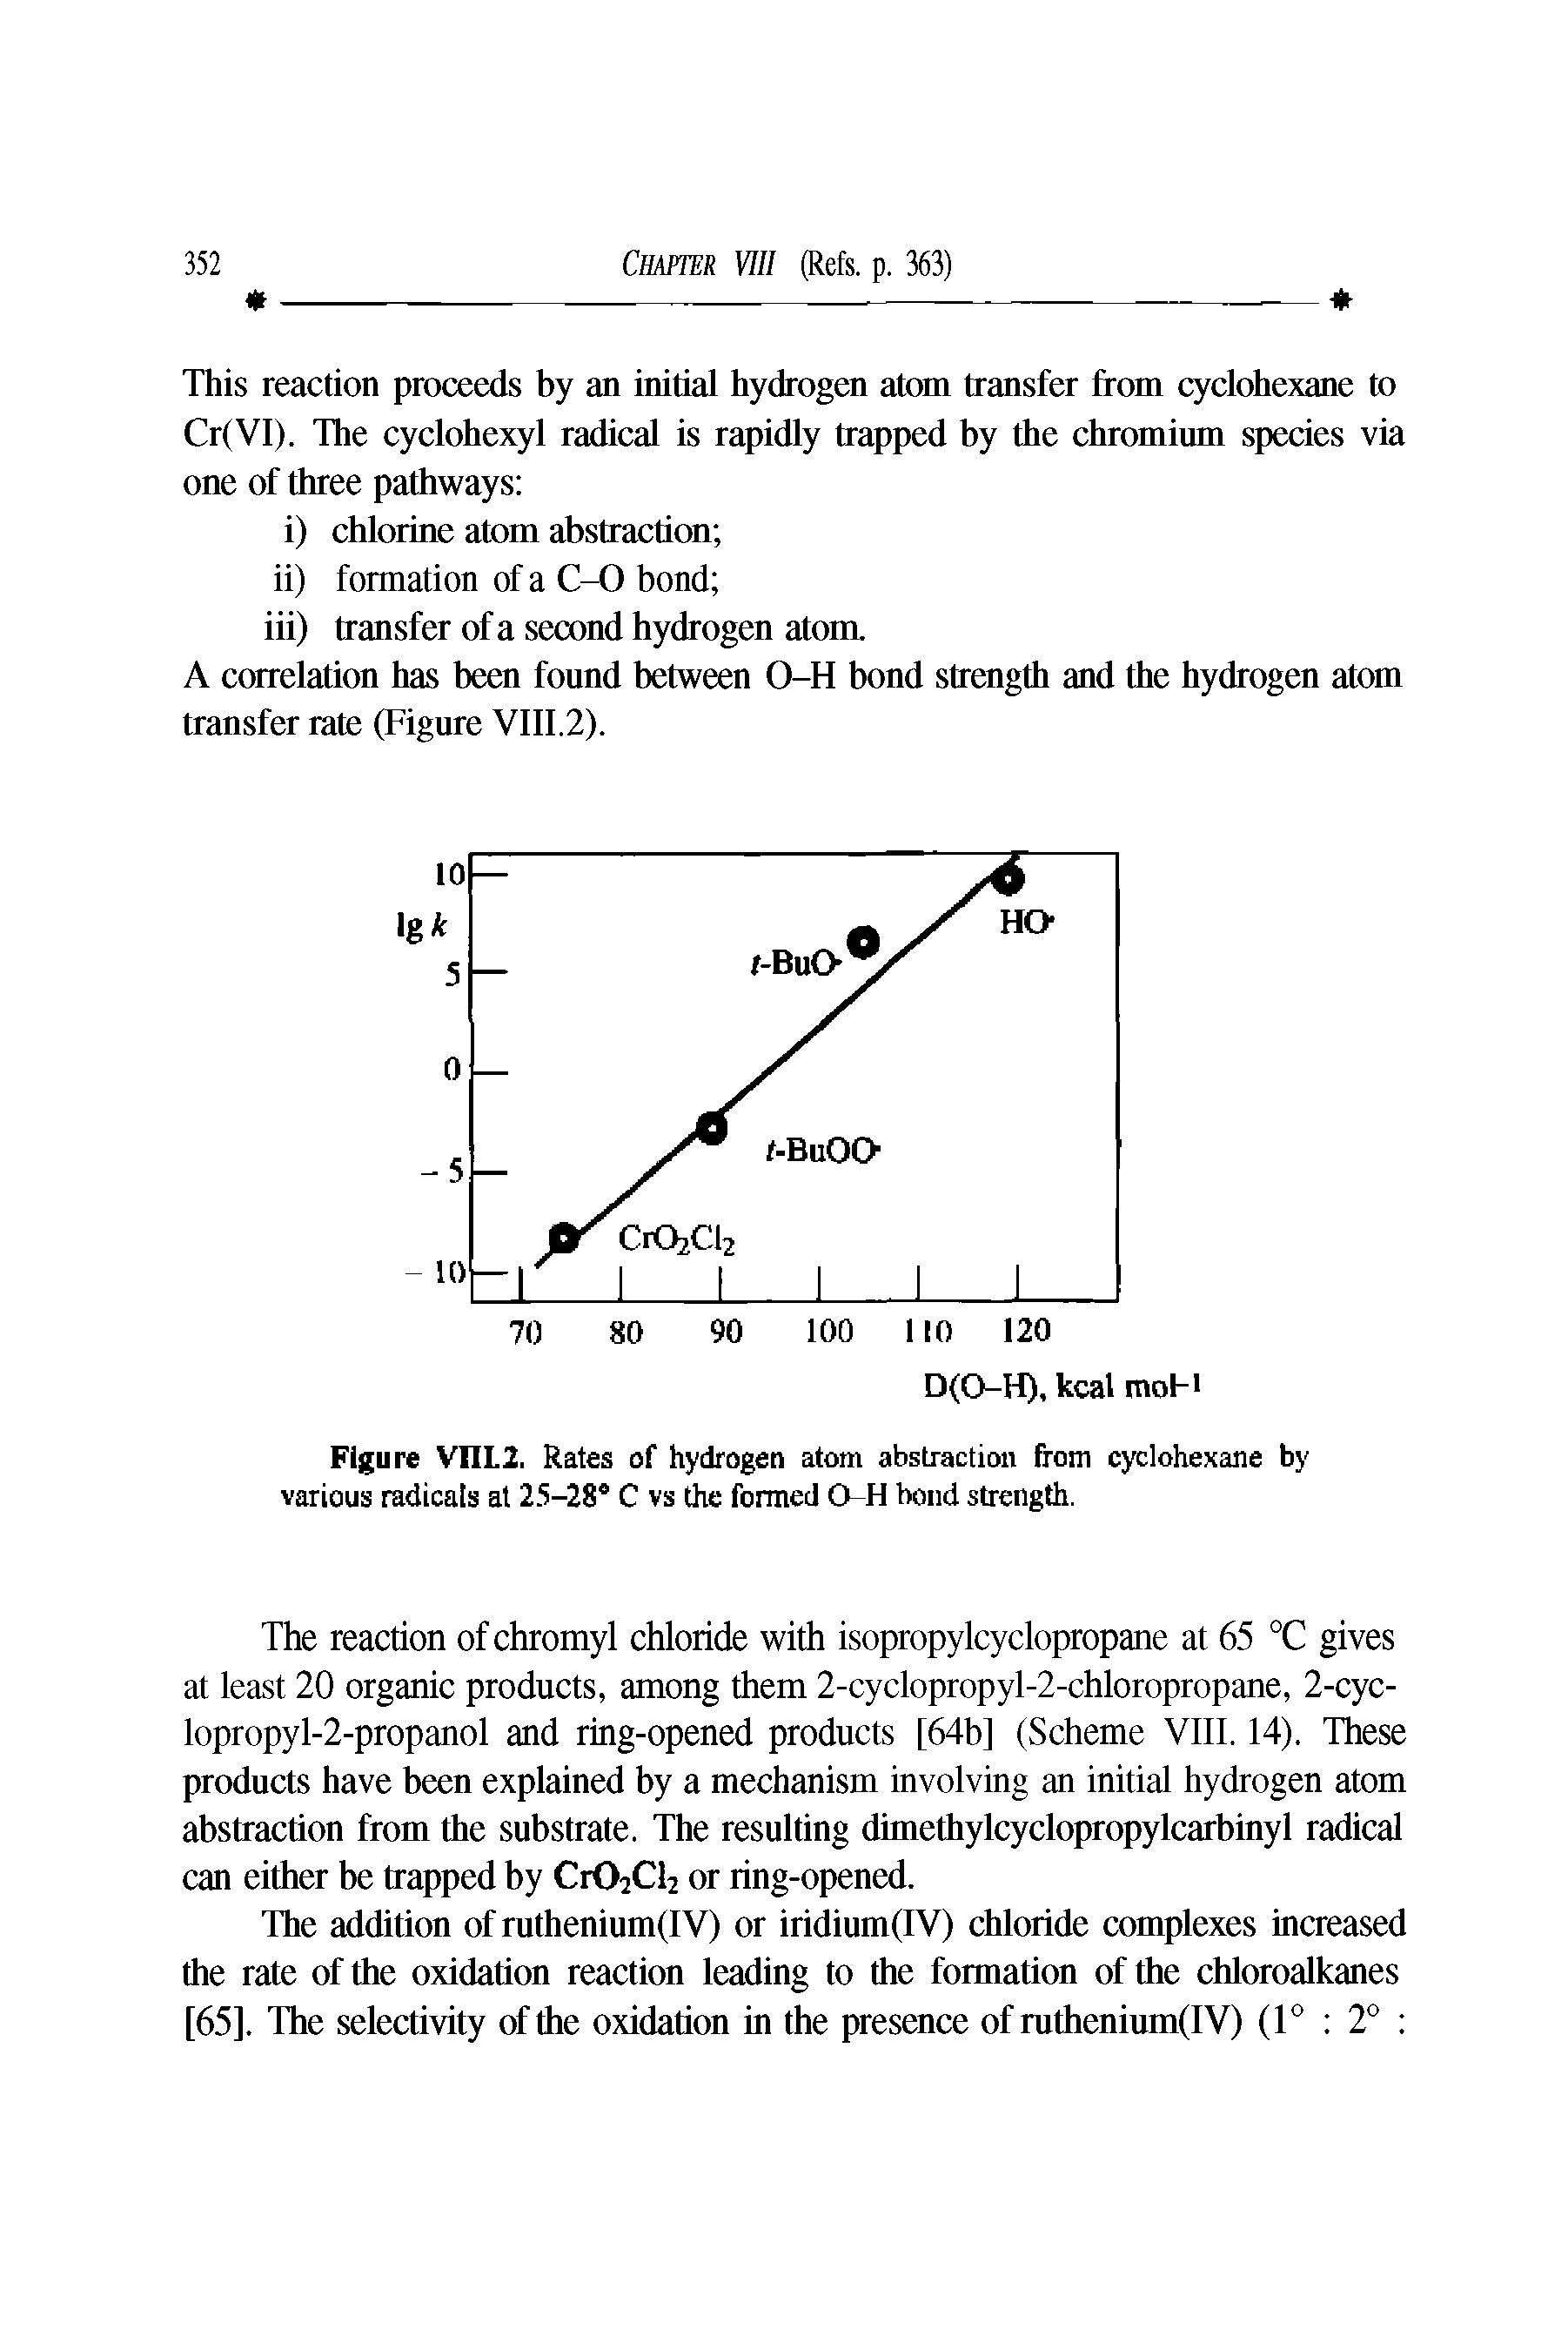 Figure Vni2. Rates of hydrogen atom abstraction from cyclohexane by various radicals at 2.5-28 C vs the formed 0-H bond strength.